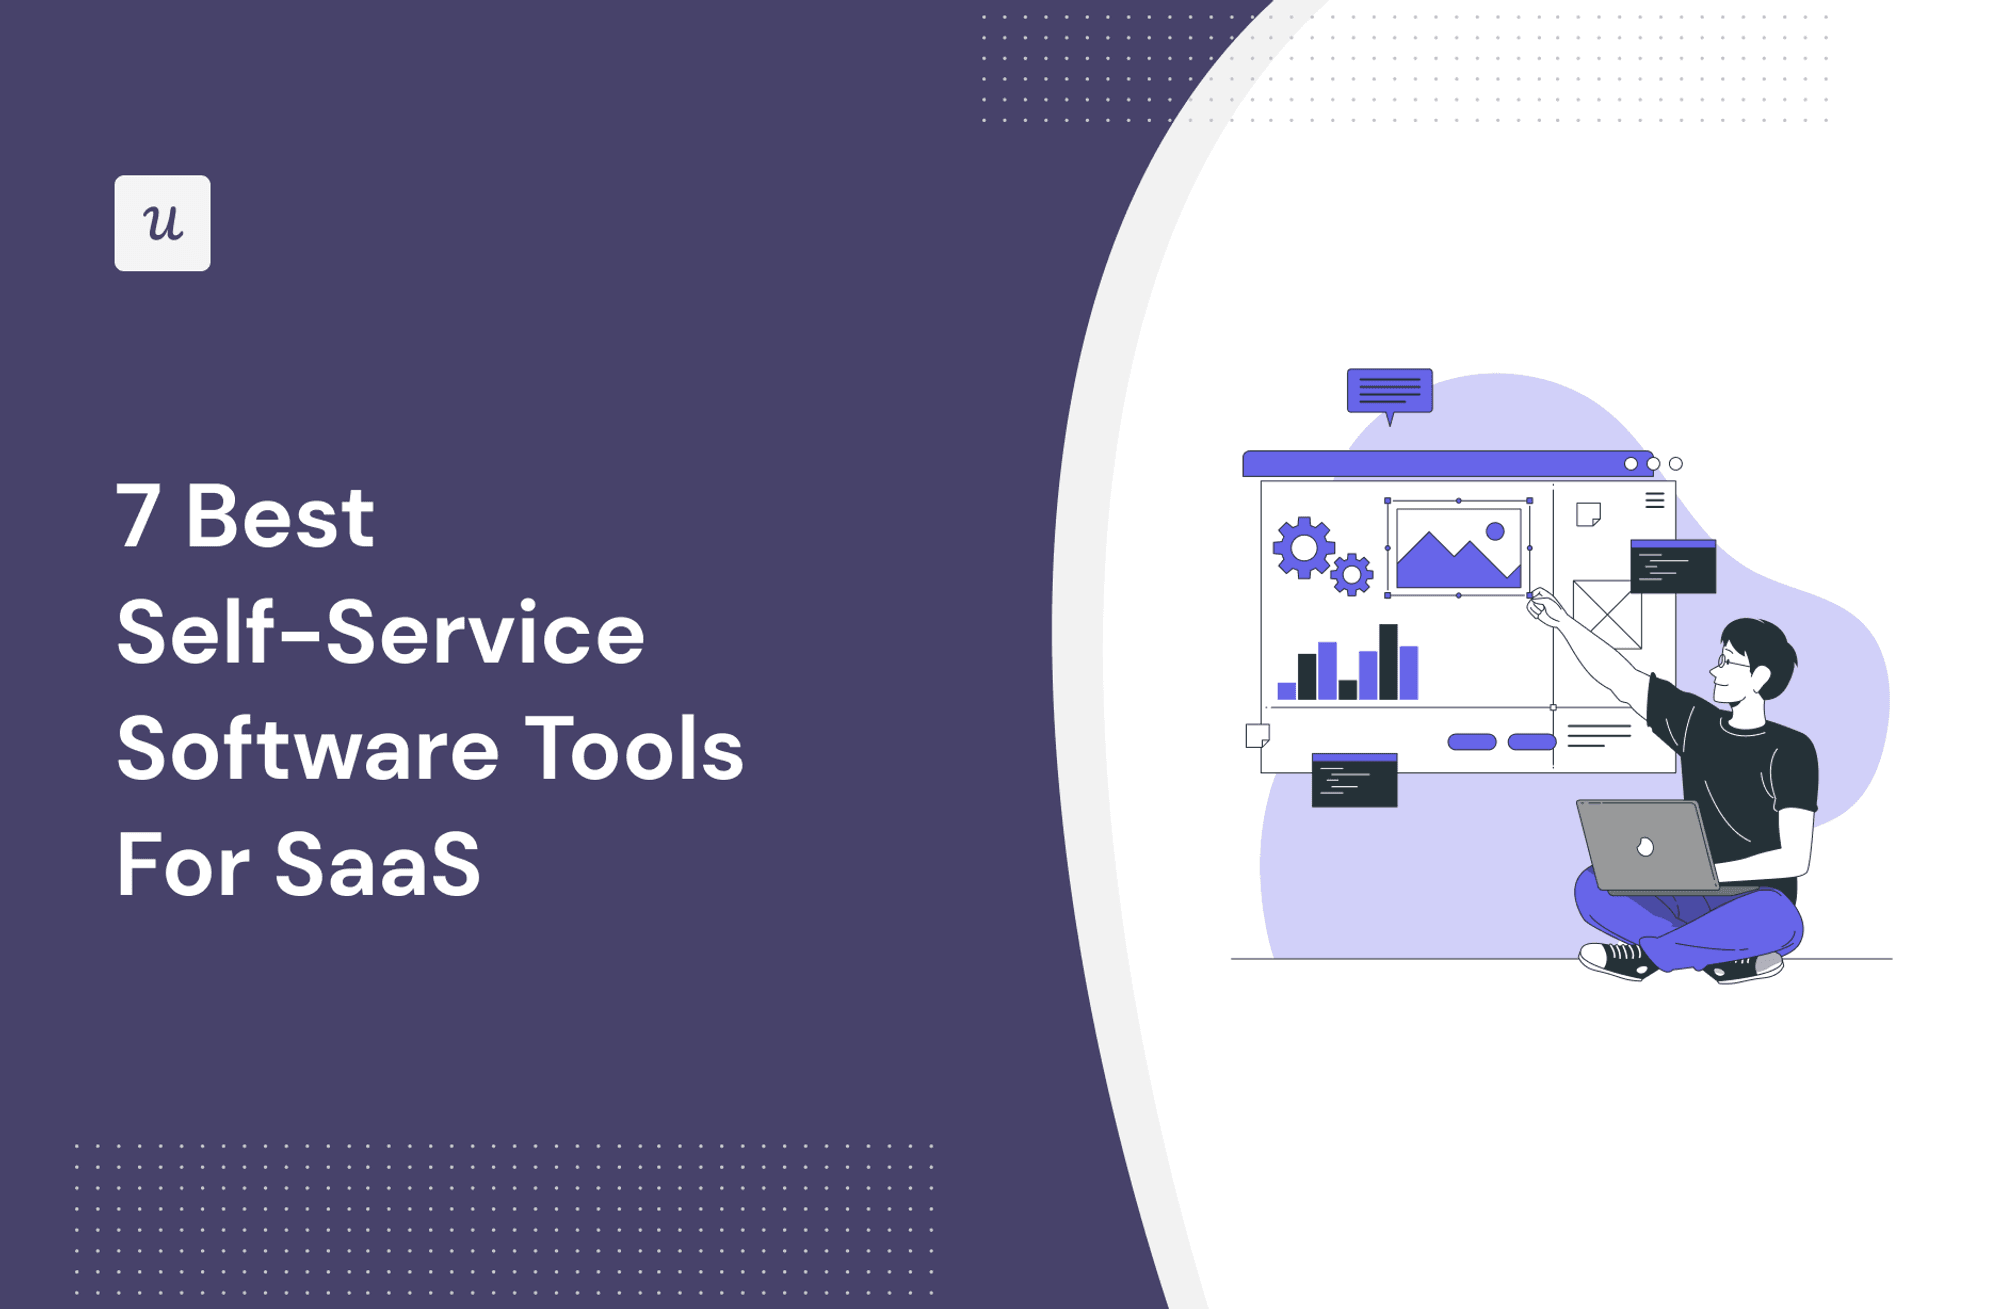 7 Best Self-Service Software Tools For SaaS cover